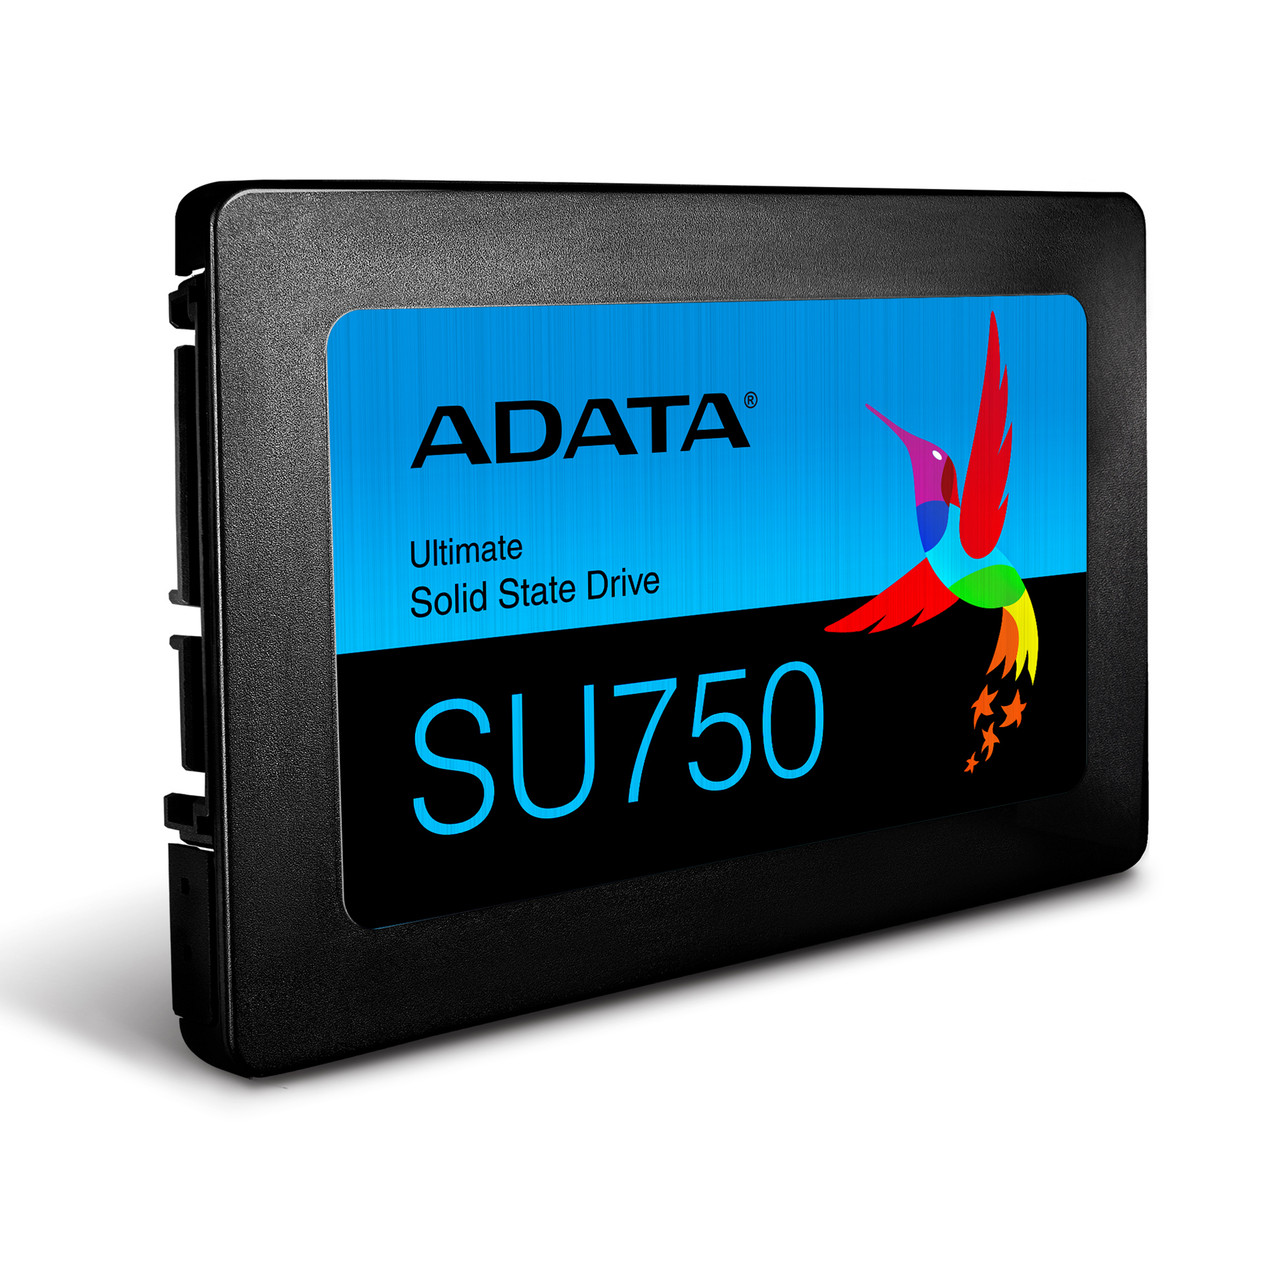 ADATA Ultimate Series: SU750 256GB SATA III - 2.5" Internal Solid State  Drive | 3D NAND - Black/Green SSD | Up to 550MBps - 1PK - ADATA